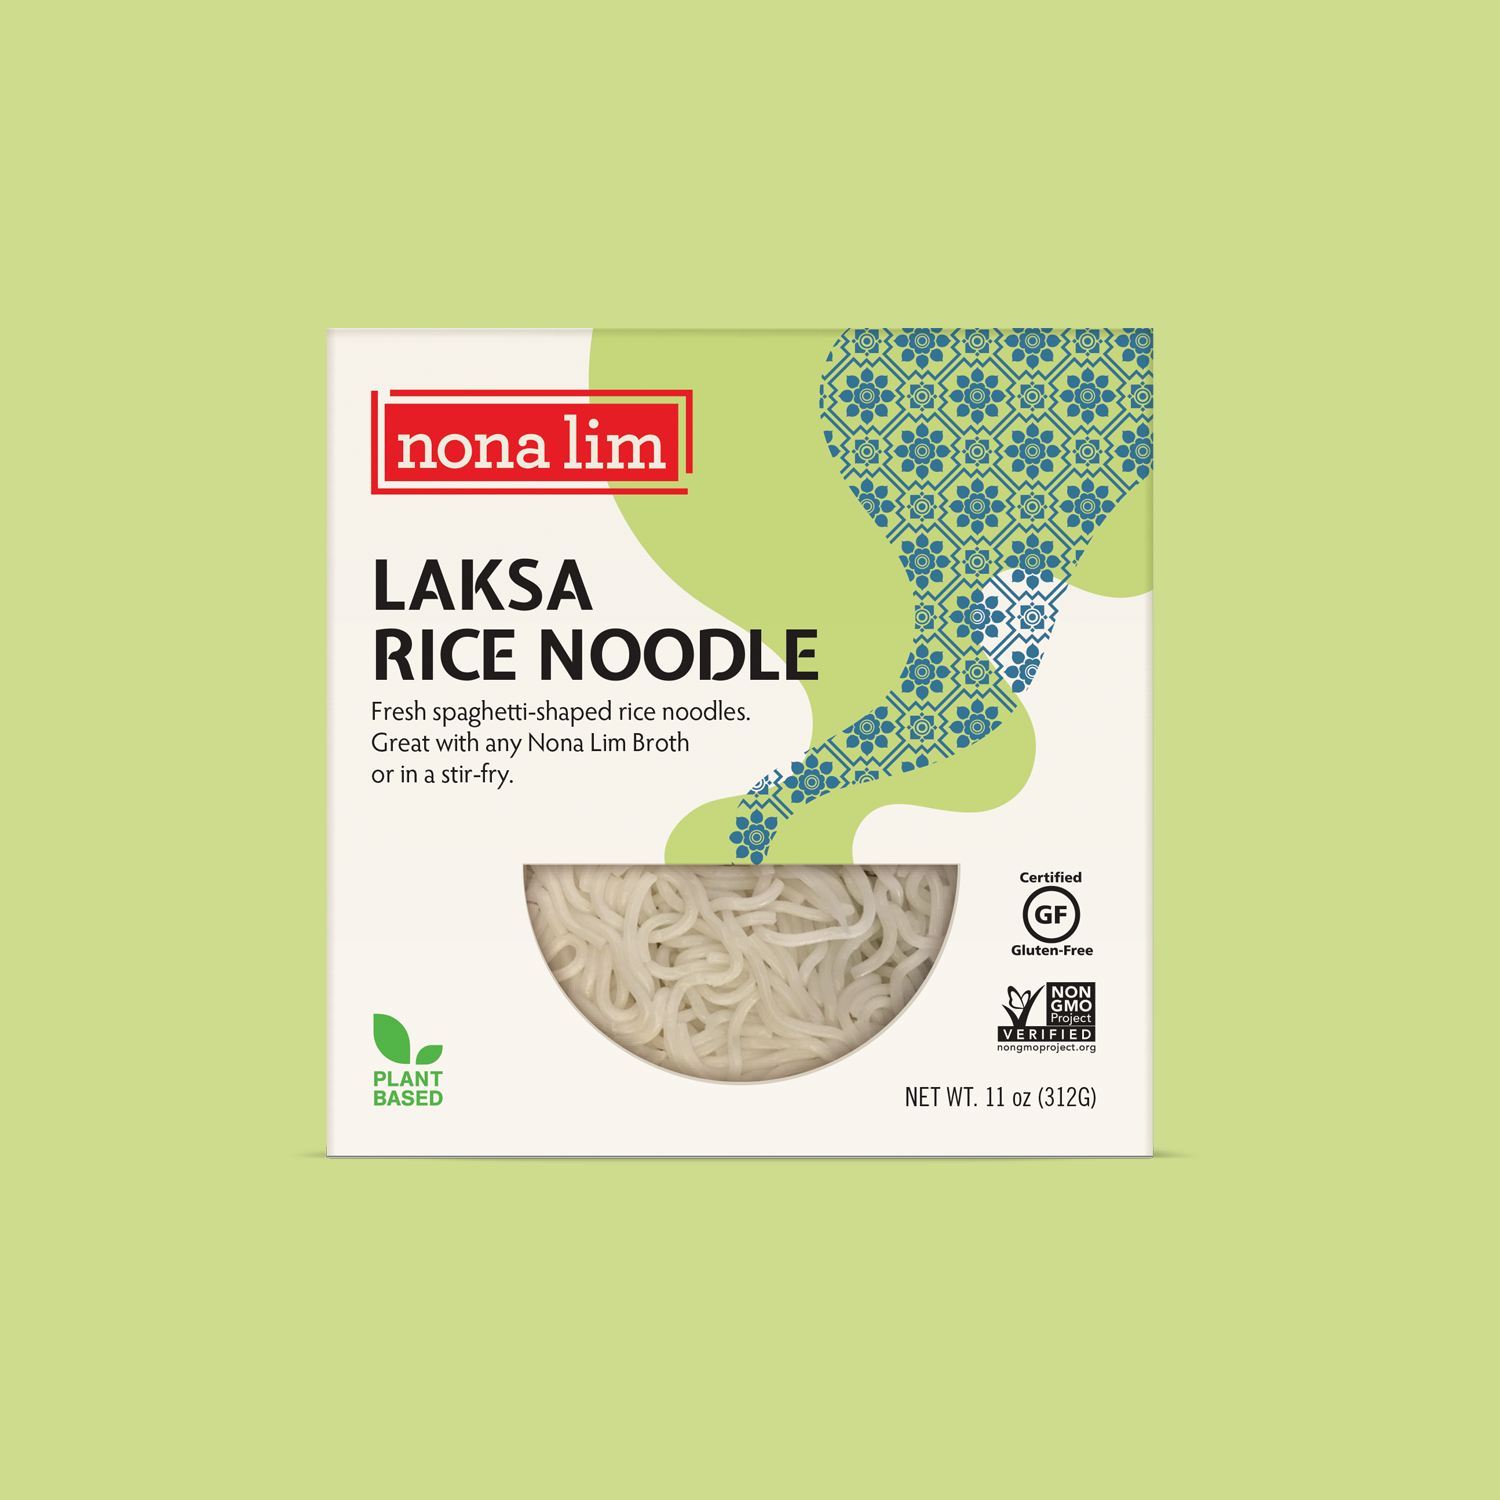 Nona Lim fresh gluten-free Laksa rice noodles in package